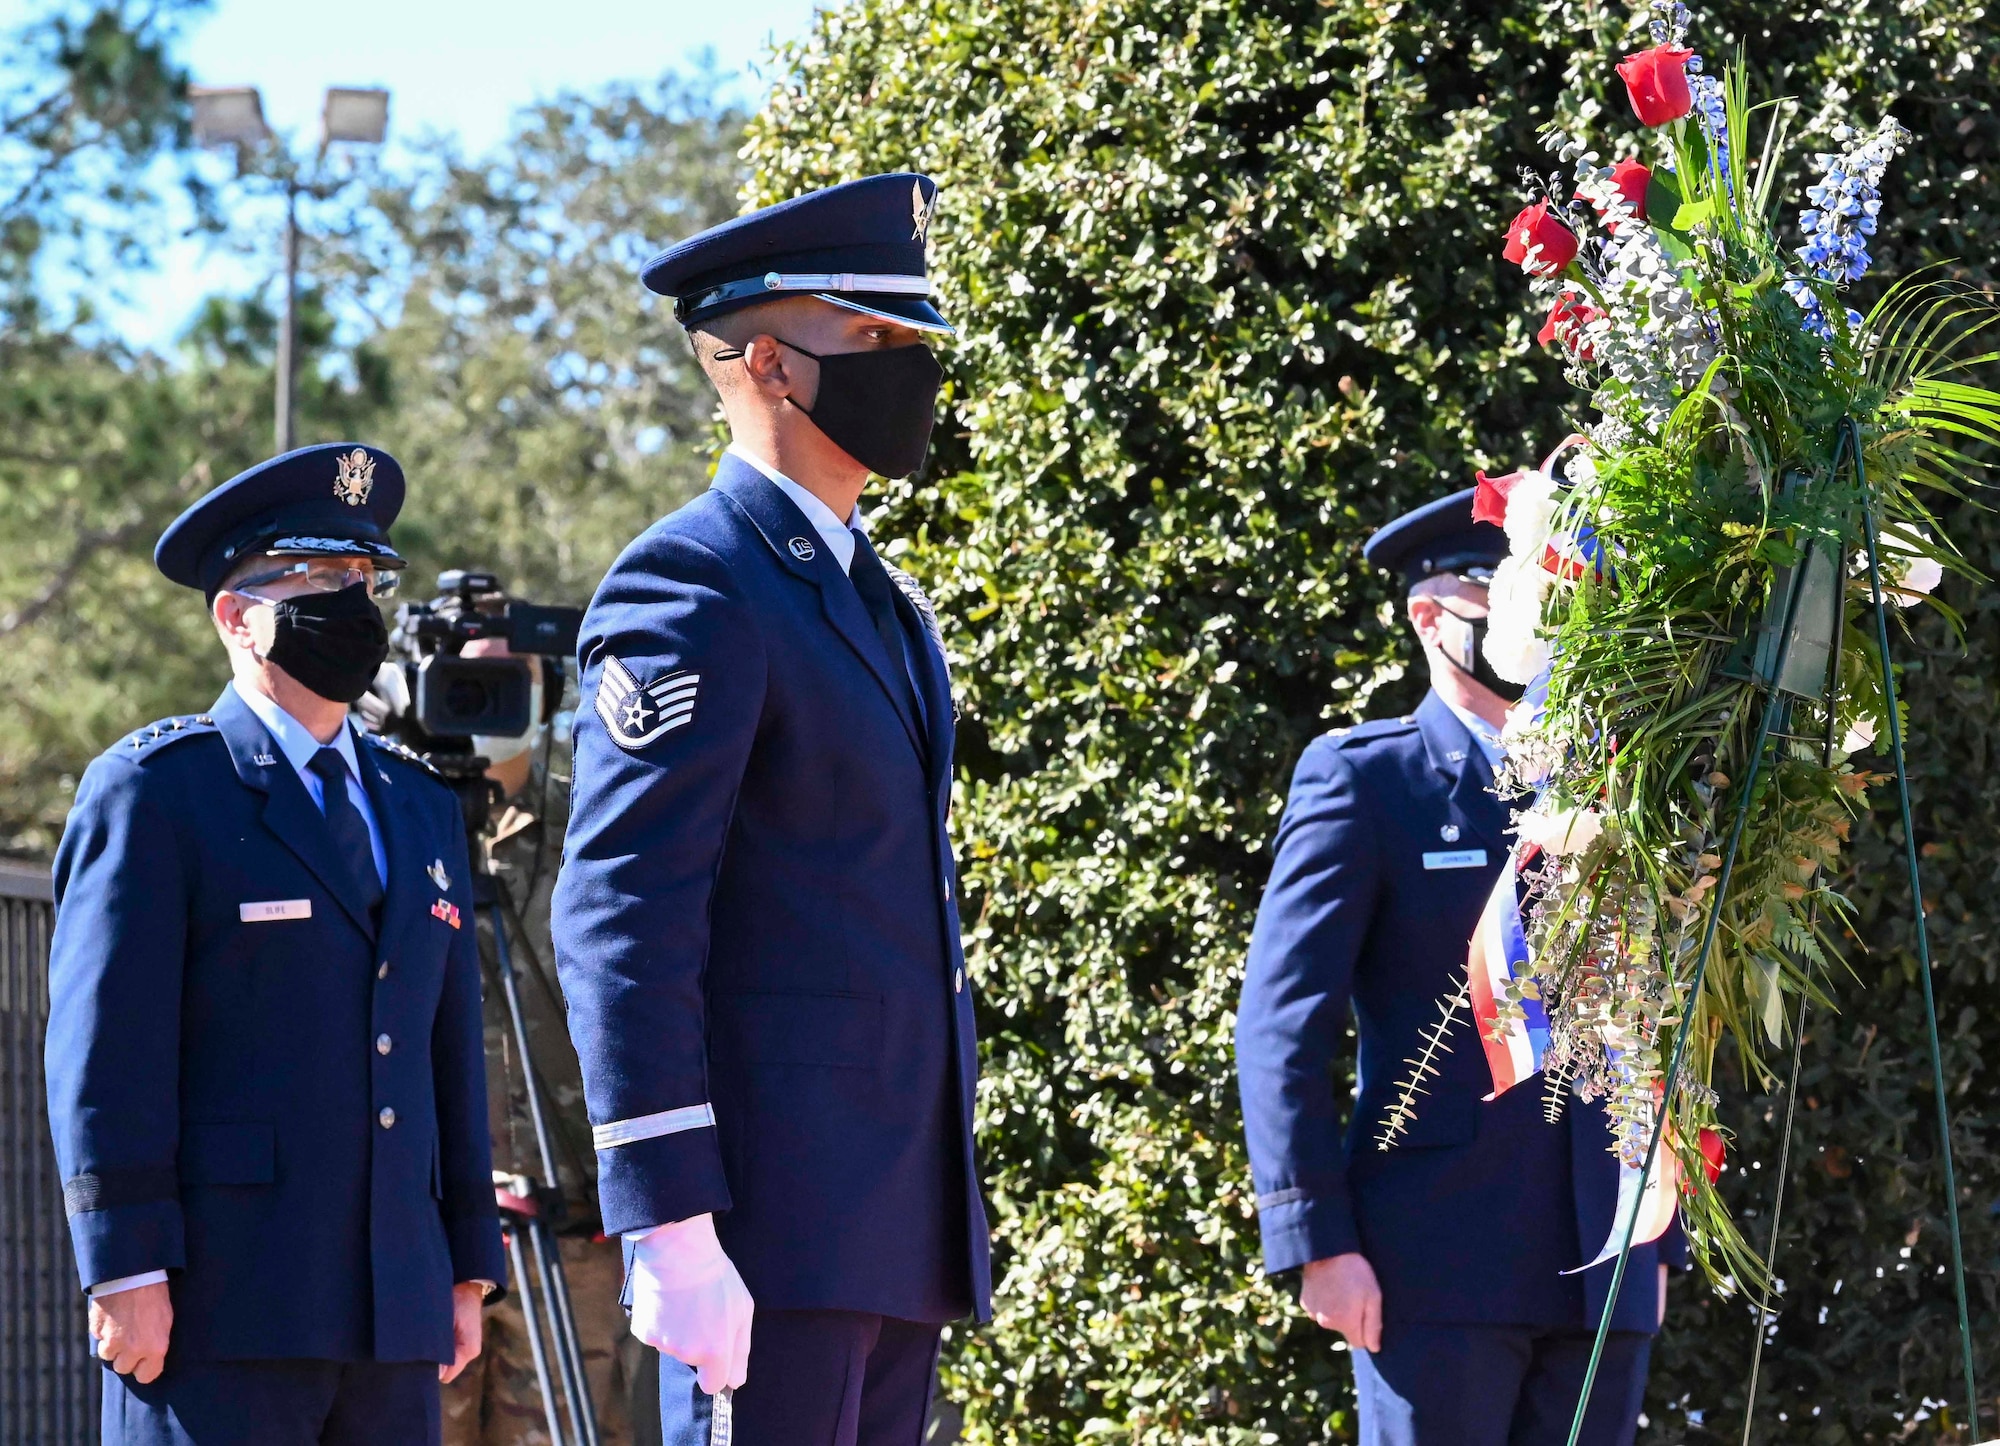 Uniformed members standing in front of a wreath.